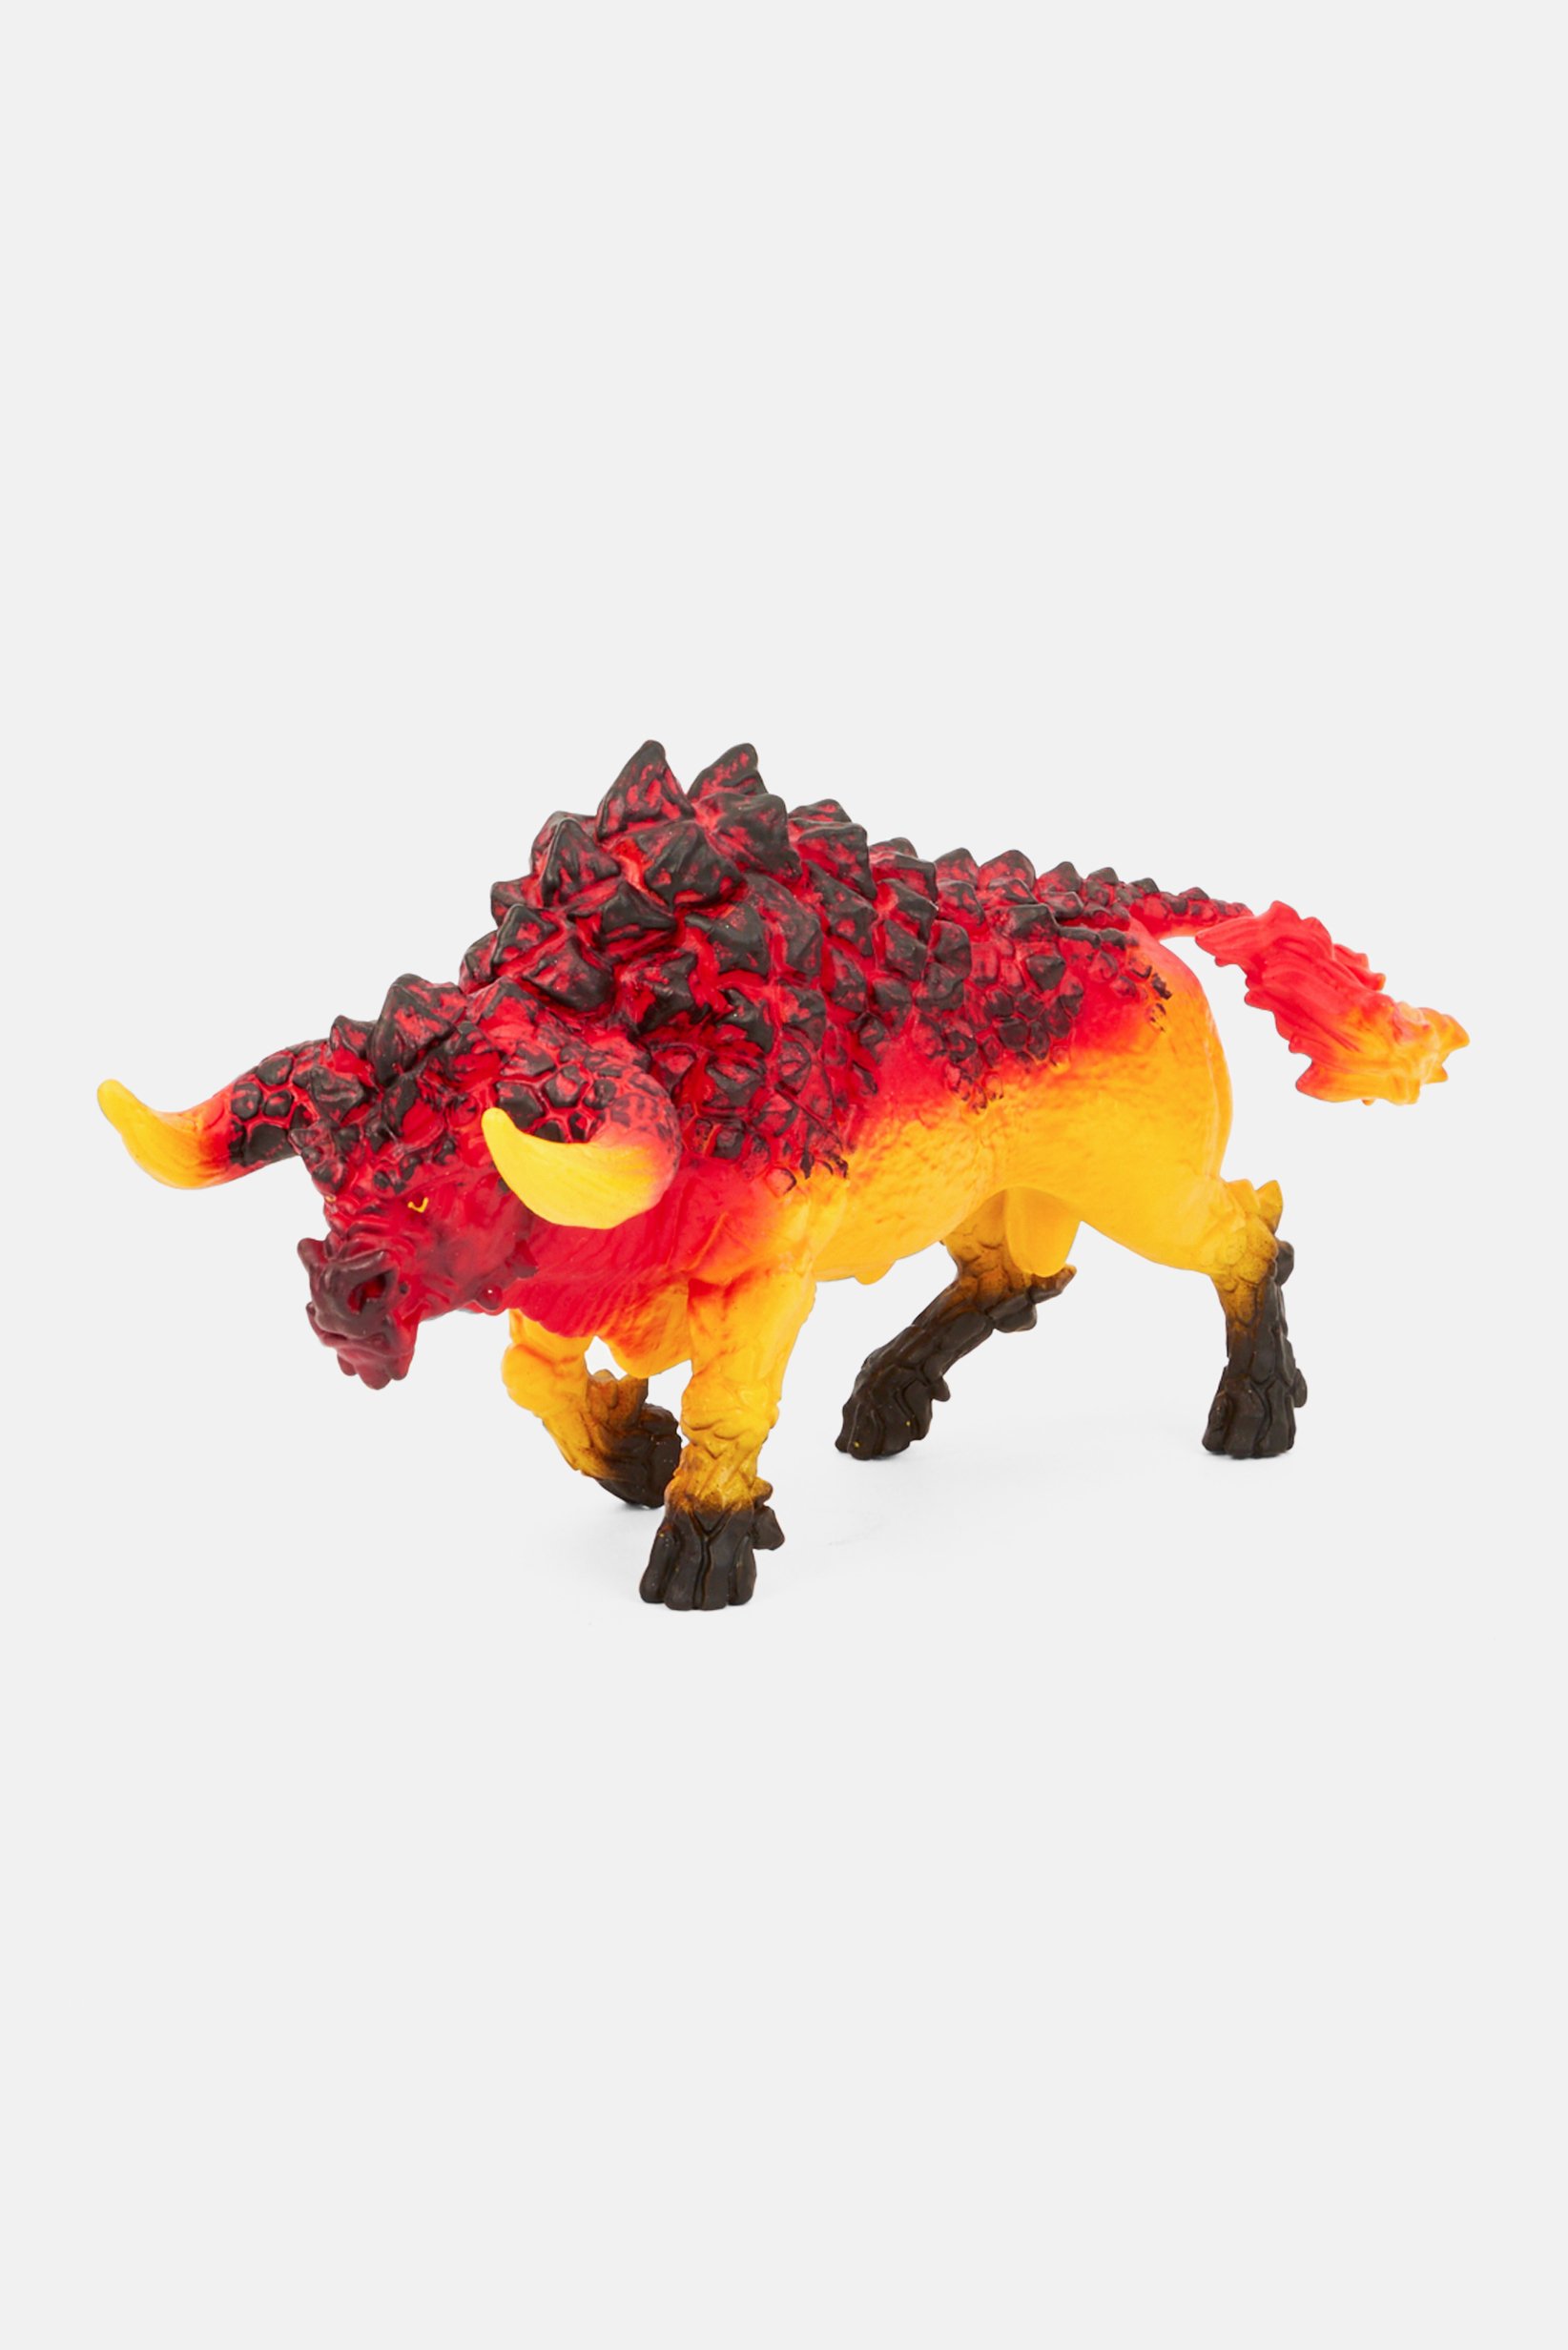 Schleich Eldrador Creatures Fire Bull Toy Figure, Red Combo